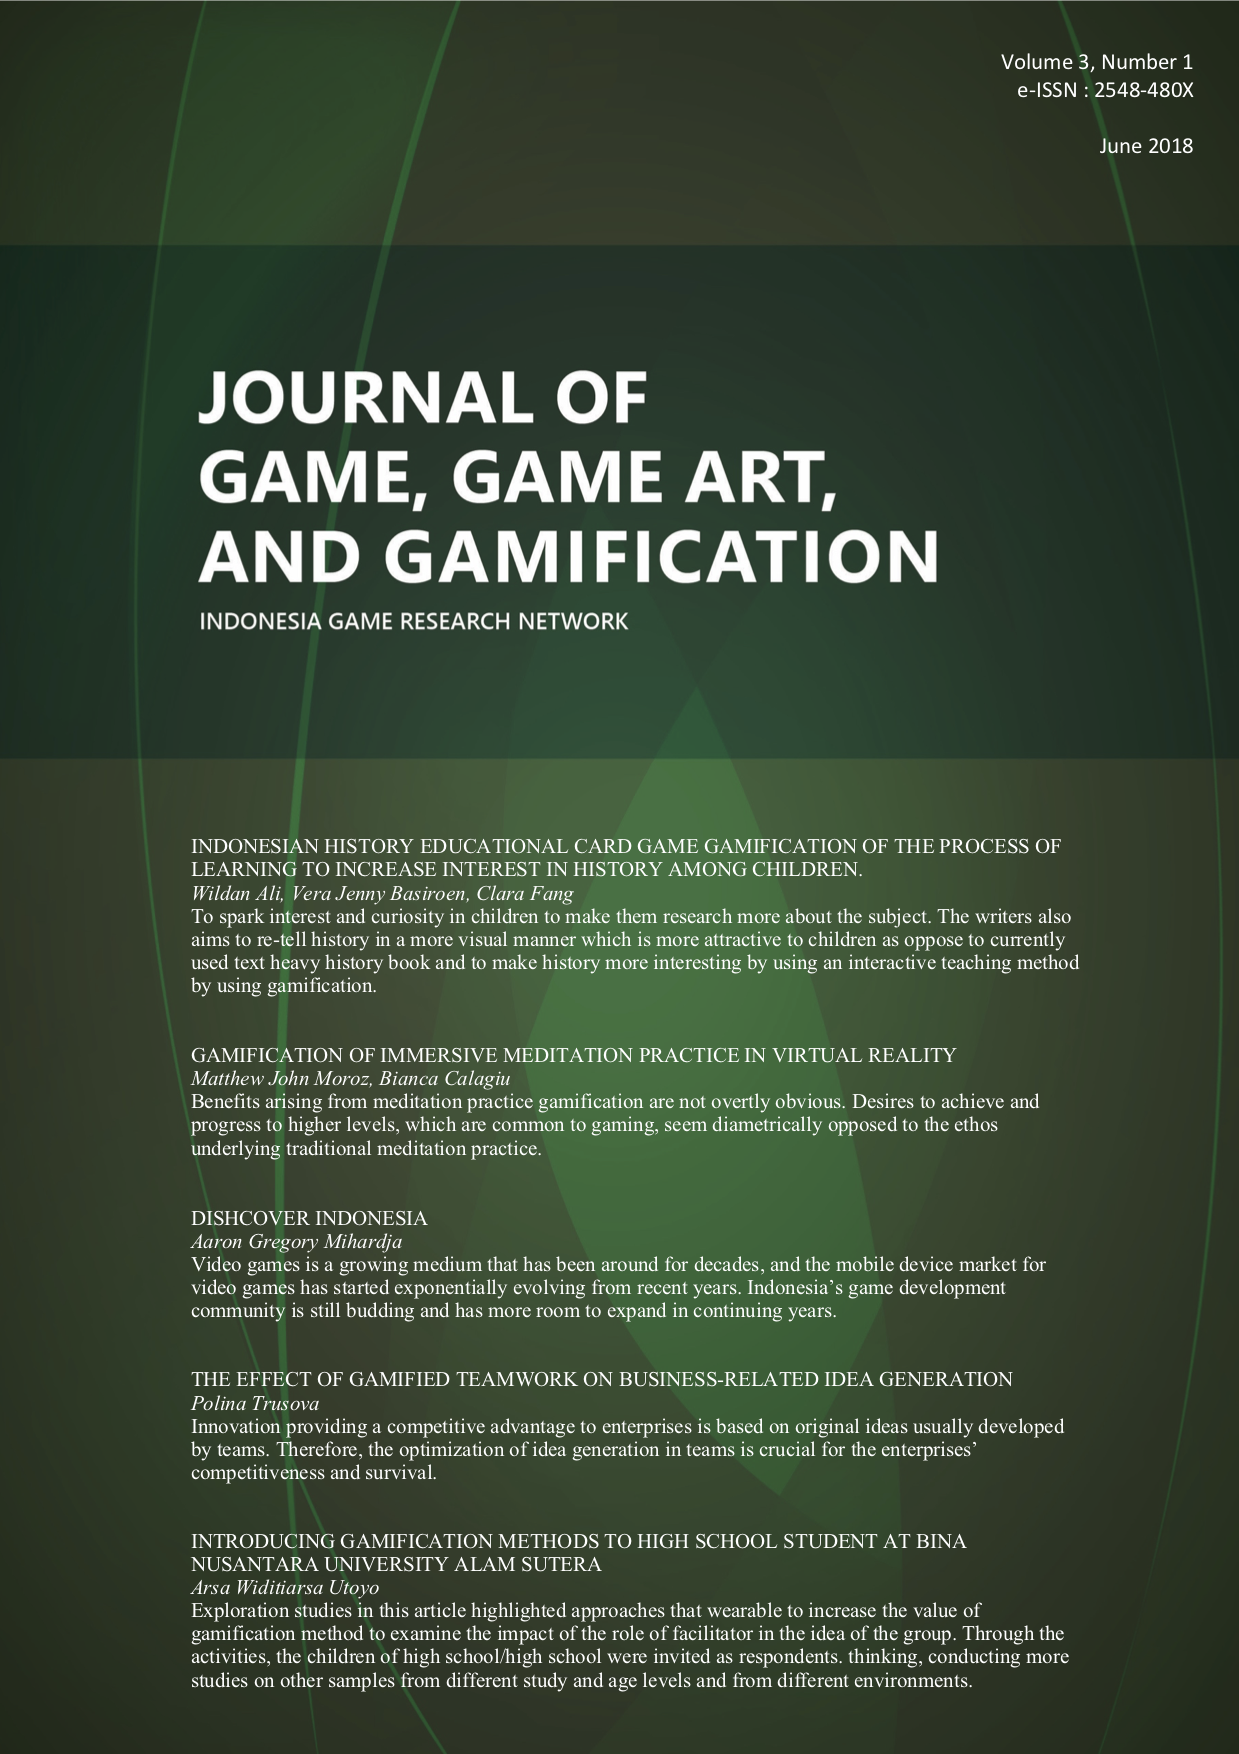 Journal of Games, Game Art, and Gamification (JGGAG)